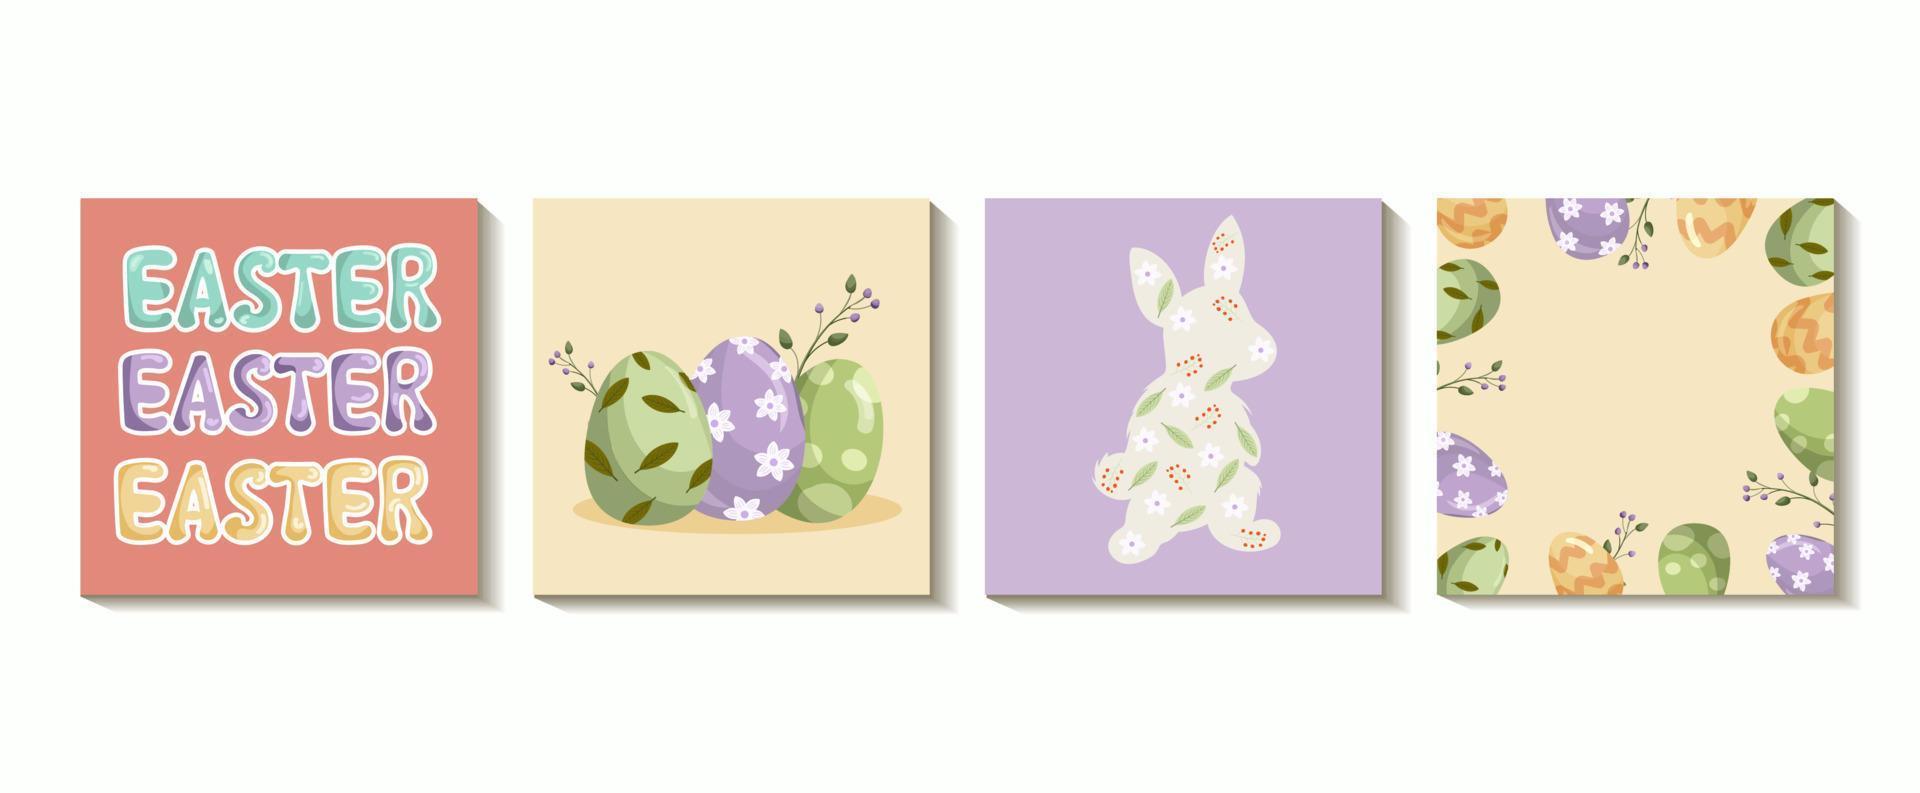 Happy Easter Set of Sale banners, greeting cards, posters, holiday covers. Trendy design with typography, hand painted plants, dots, eggs and bunny, in pastel colors. Modern art minimalist style. vector